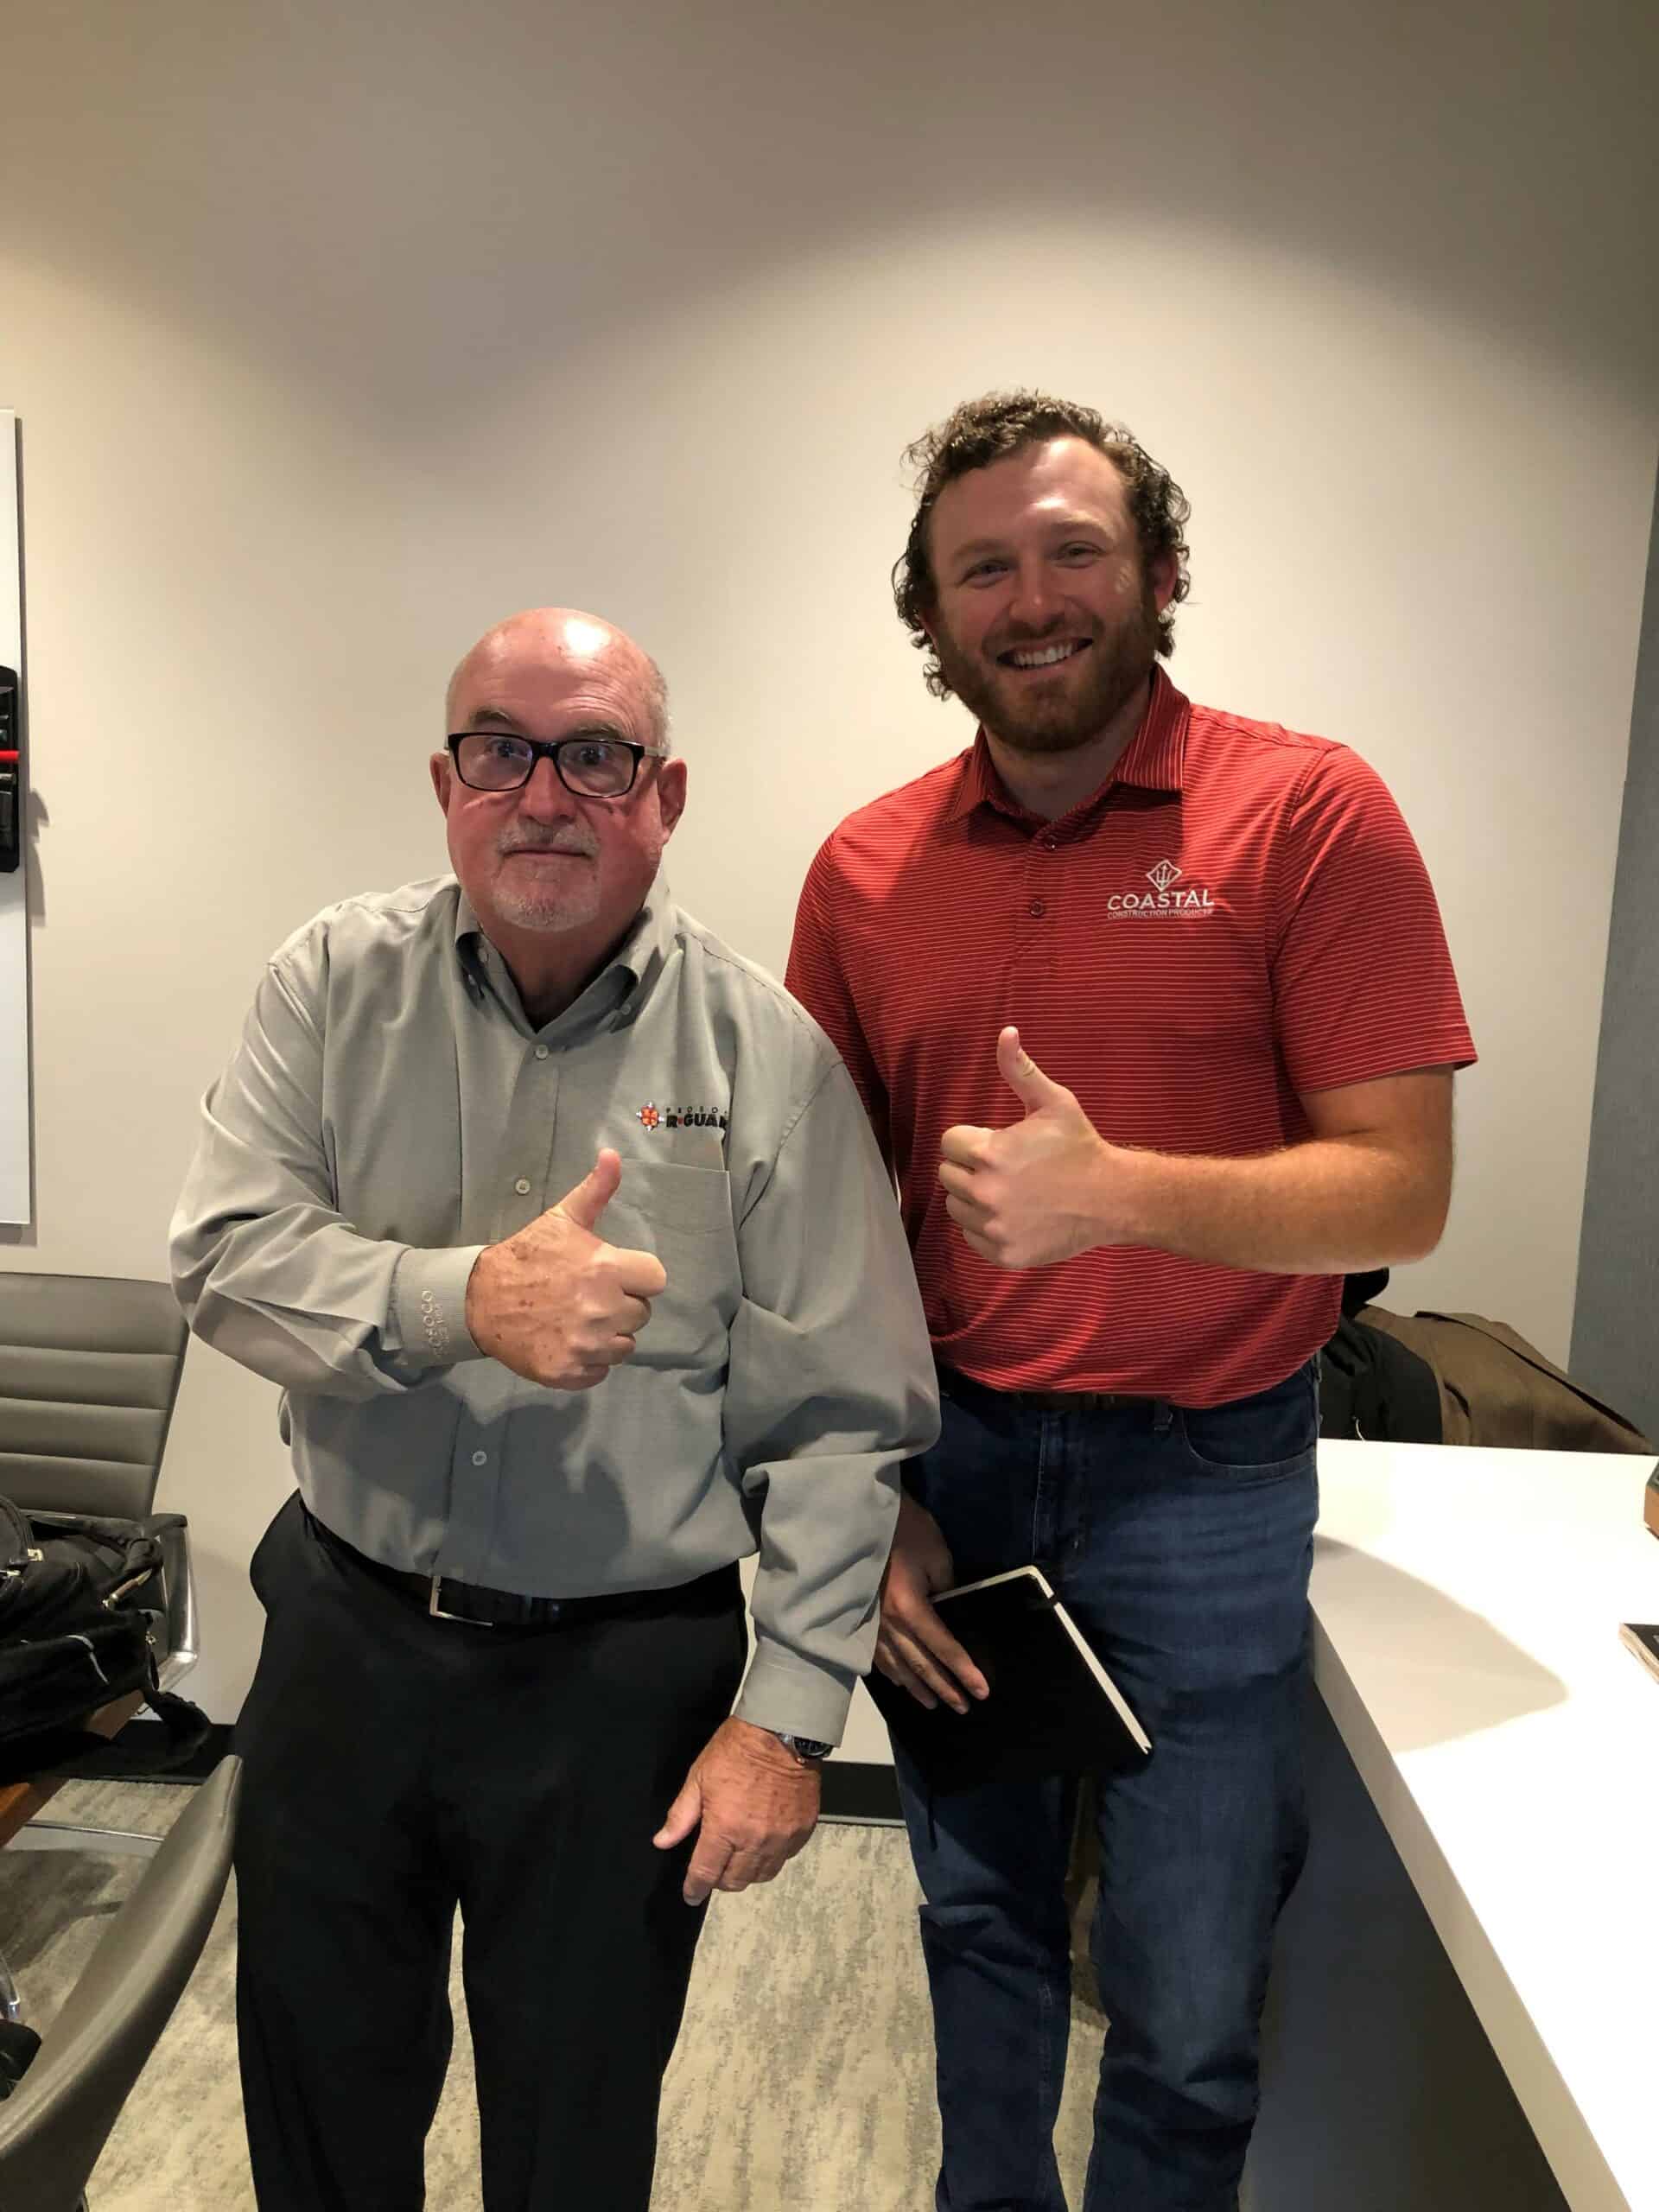 Alec Morris (right) and PROSOCO's Building Envelope Group Technical Specialist Guy Long (left) are pictured at a customer event in Nashville. 